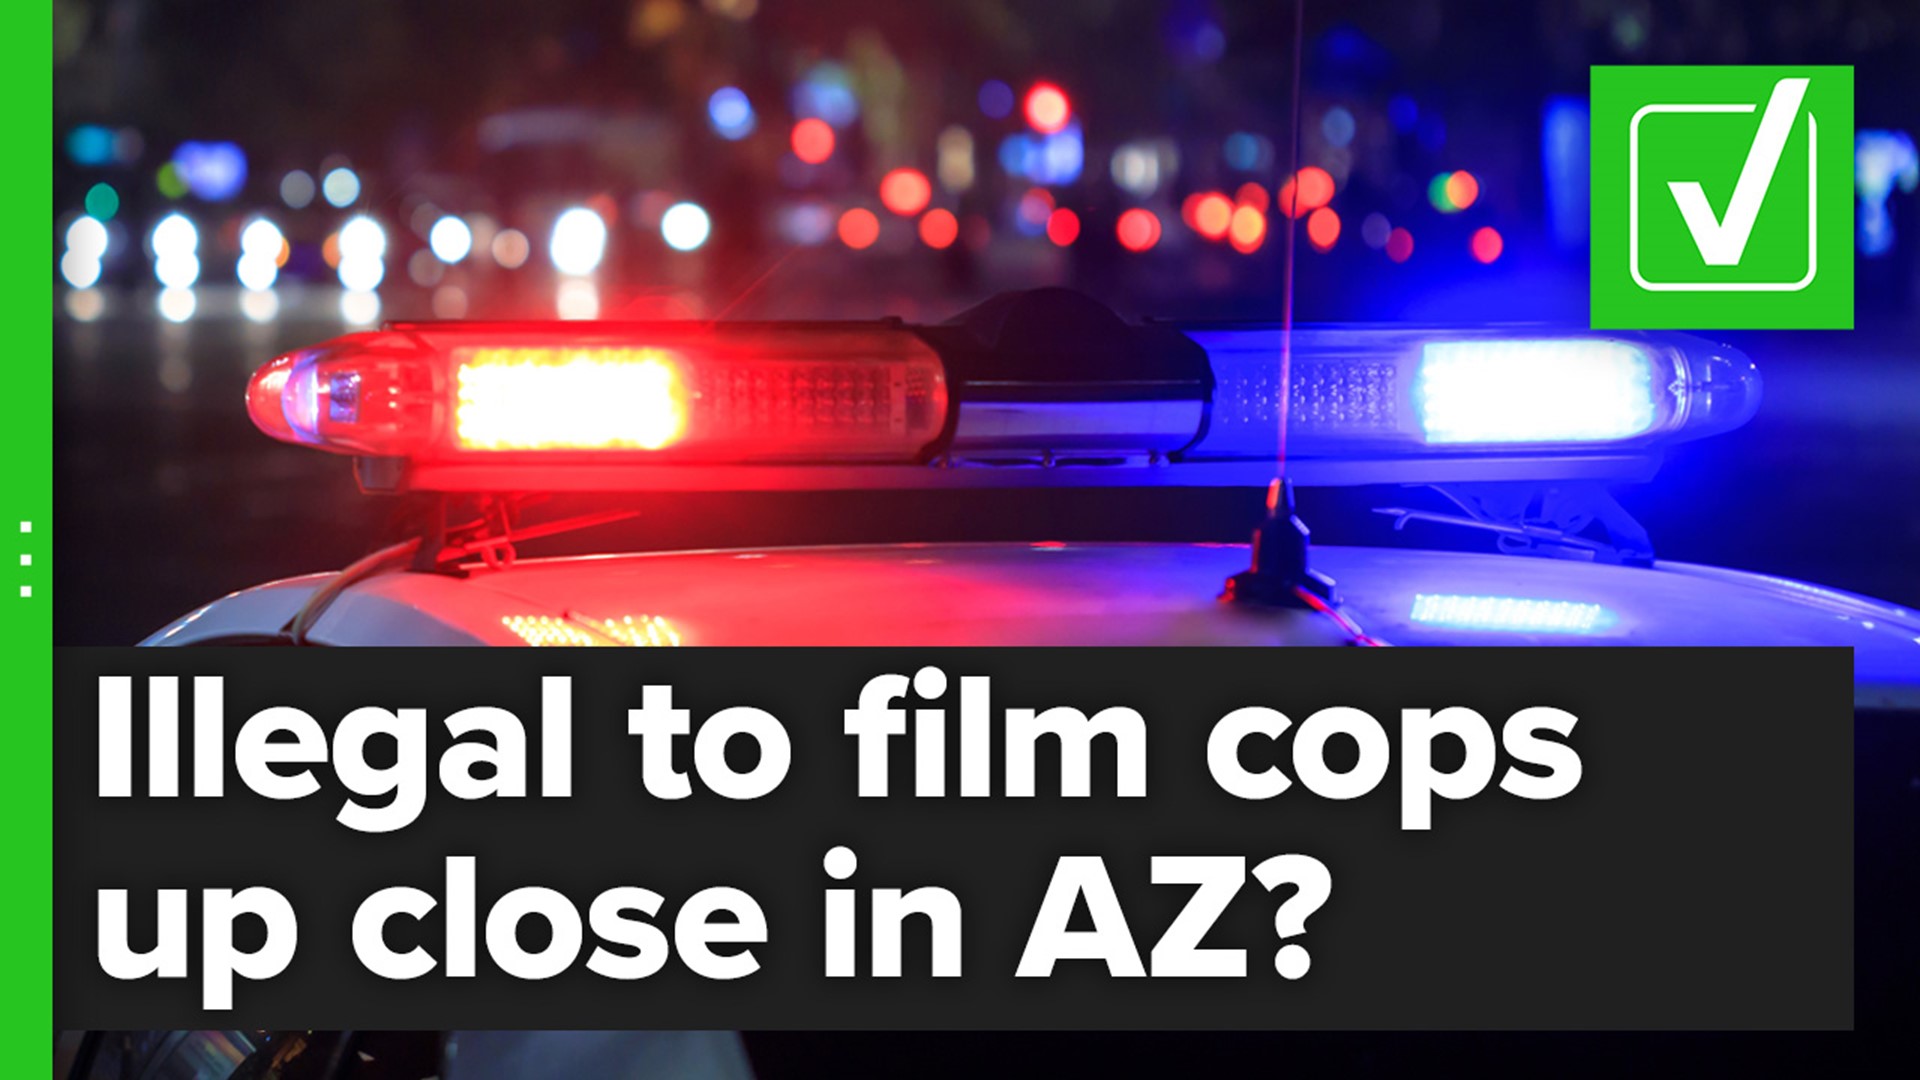 Arizona’s HB 2319 makes it illegal to film police within 8 feet after a verbal warning. The law goes into effect in September.